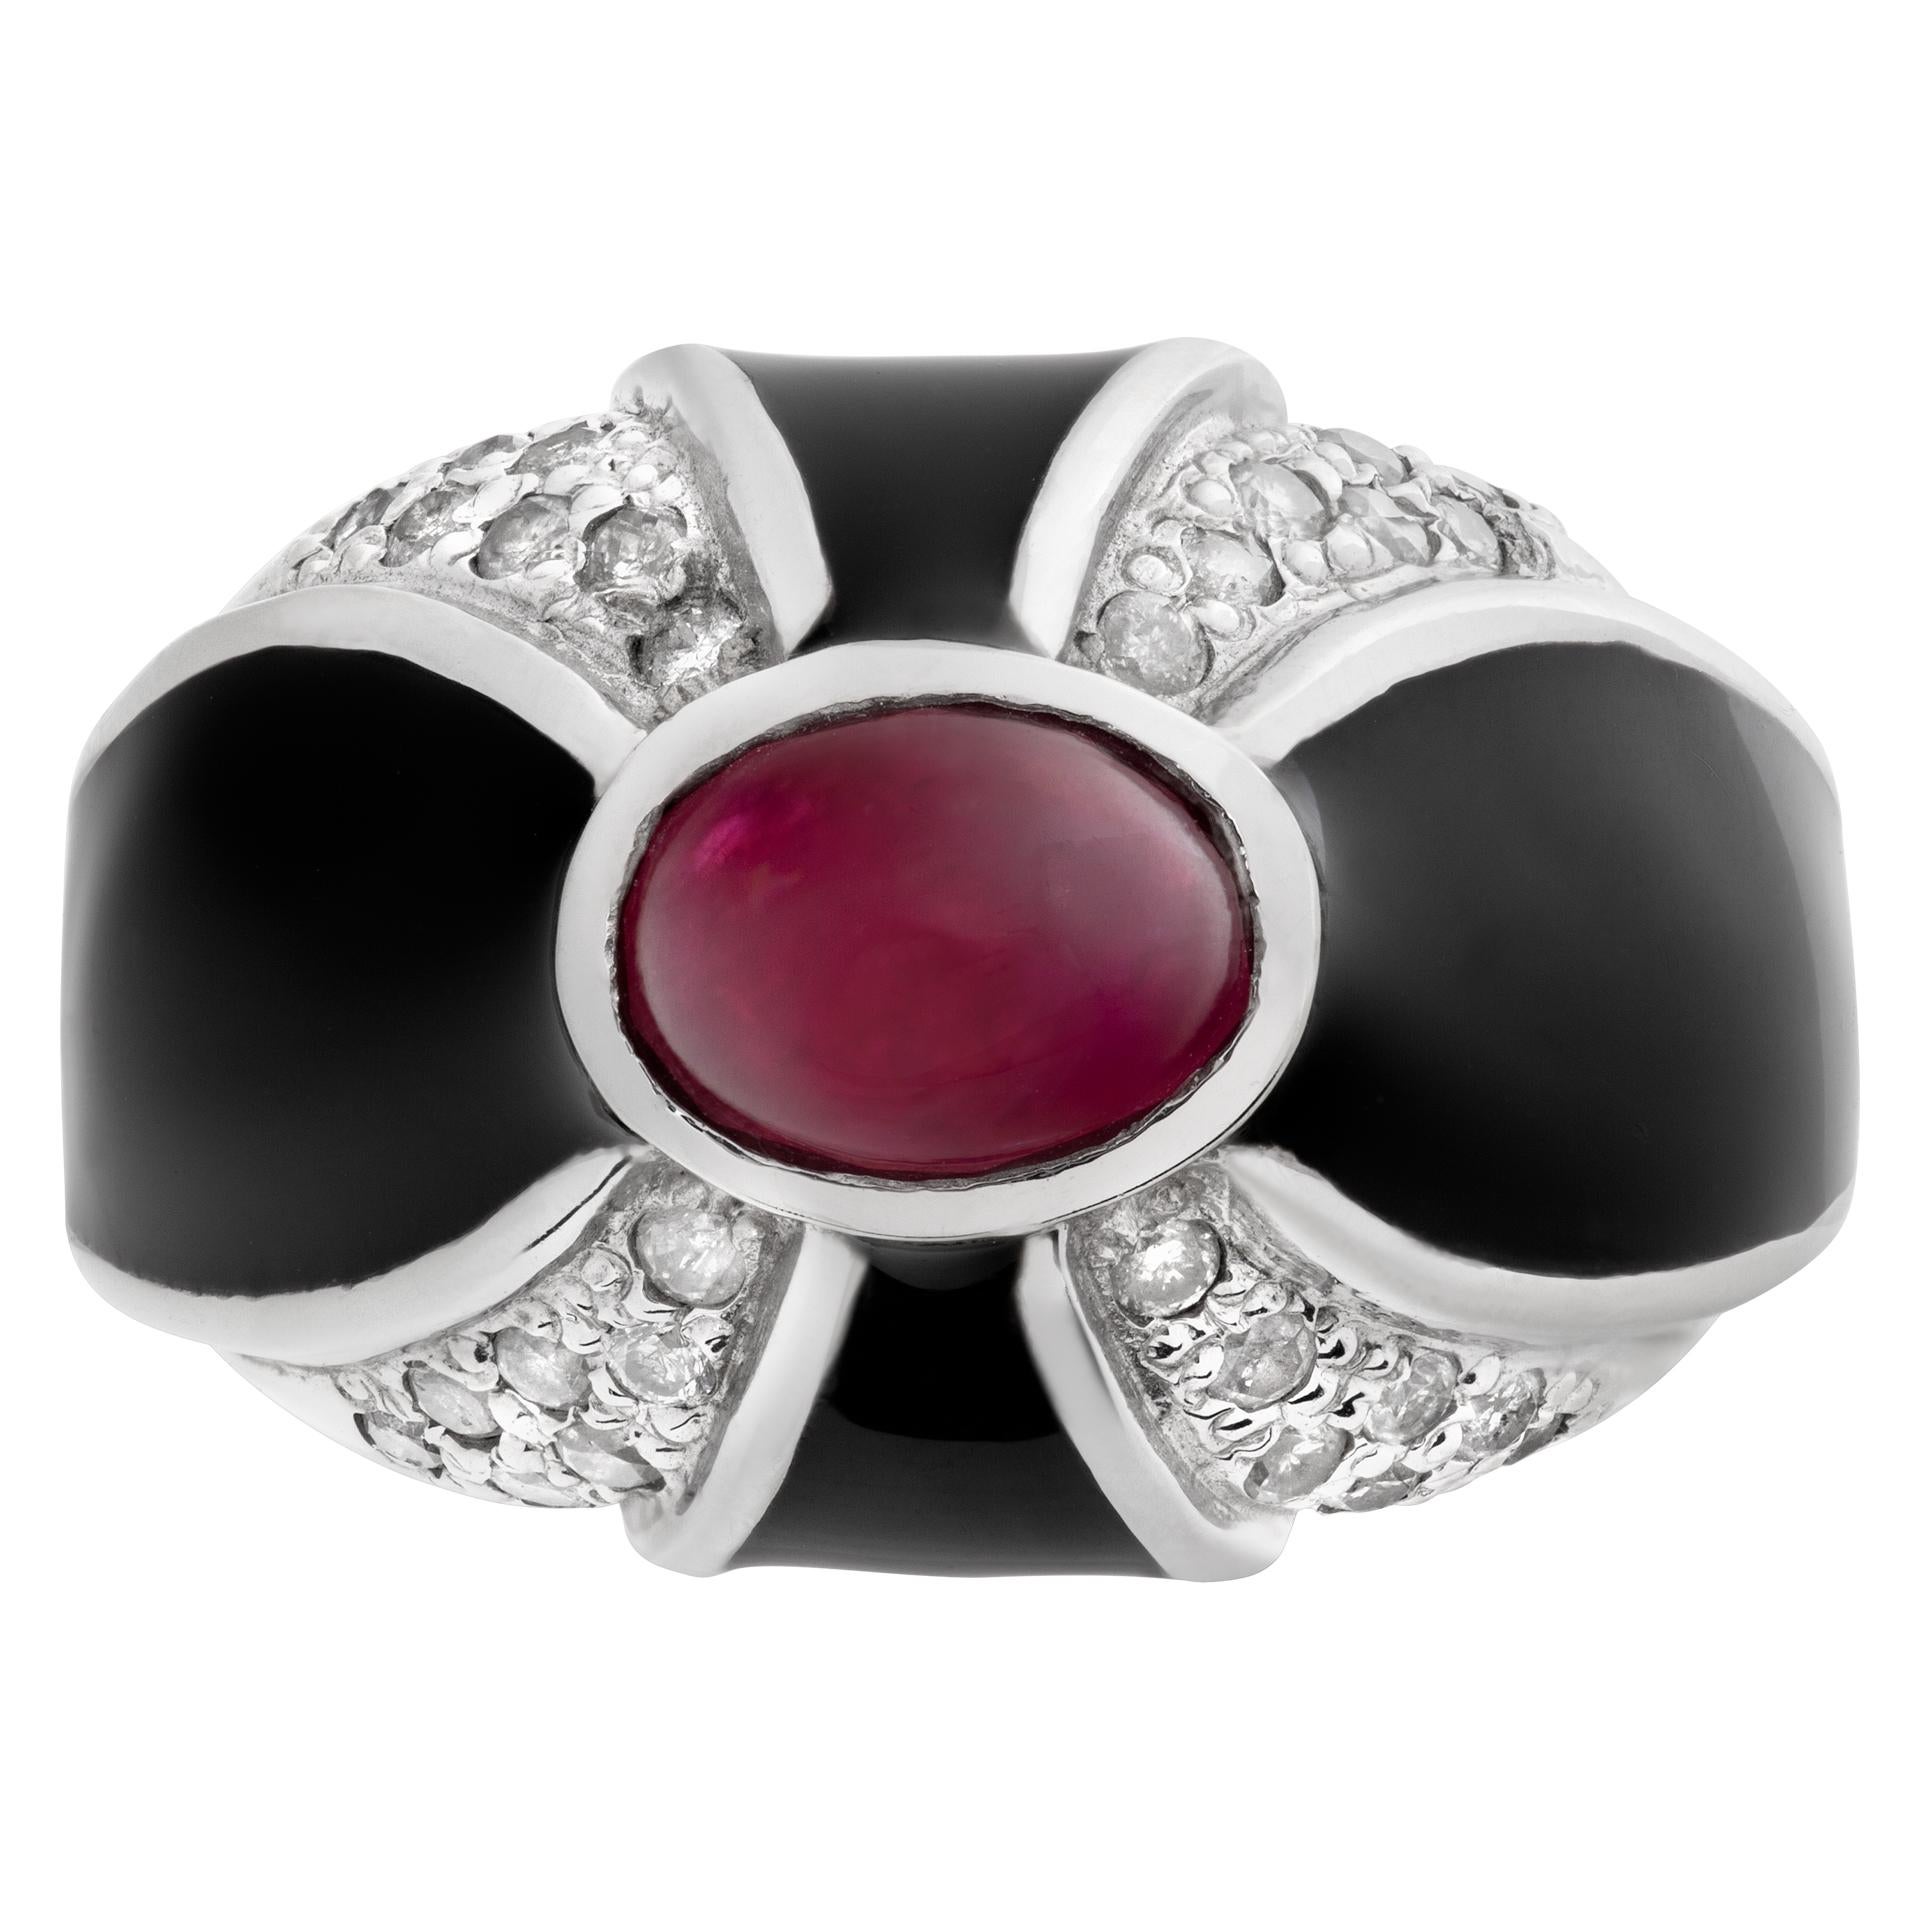 ESTIMATED RETAIL $4,250.00 - YOUR PRICE $2,630.00 - Stunning cabochon ruby and diamond ring in 14k white gold with black enamel. Approximately 0.50 carats in H color, SI diamonds. Size 5 1/2 This ring is currently size 5.5 and some items can be